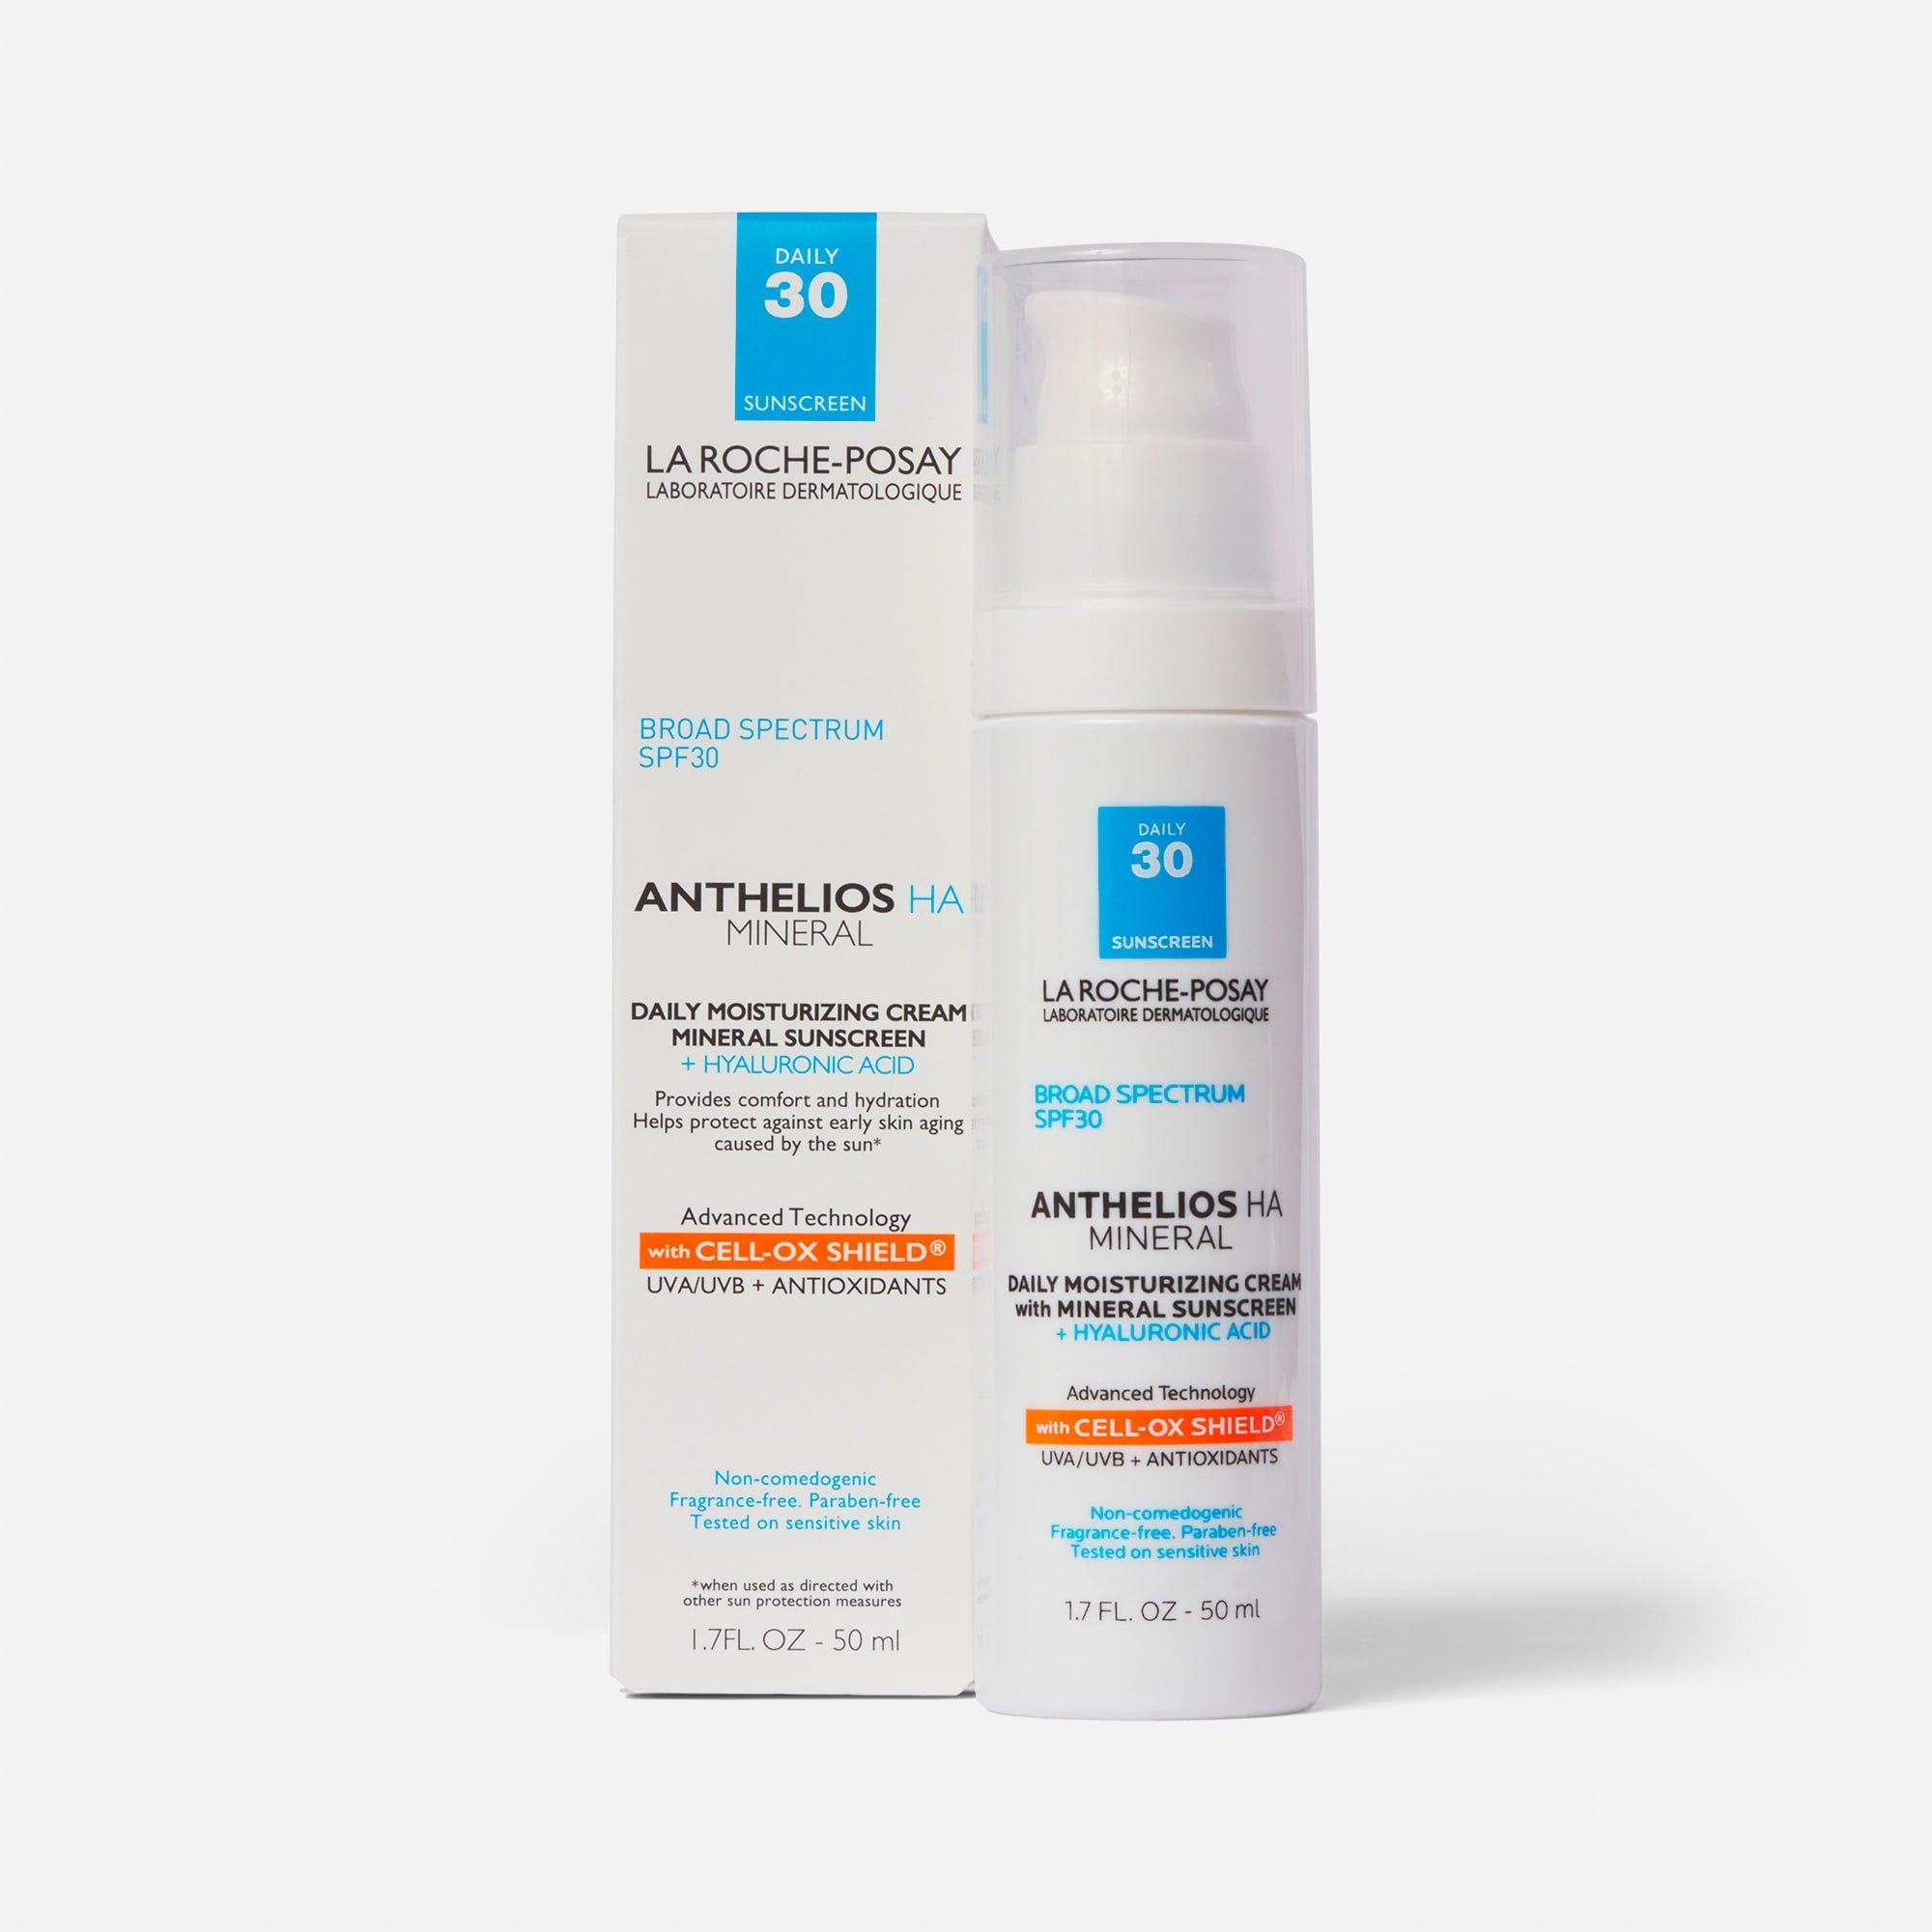 Hobart Hoved Karriere La Roche-Posay Anthelios HA Mineral Sunscreen Moisturizer, SPF 30, 1.7 oz.